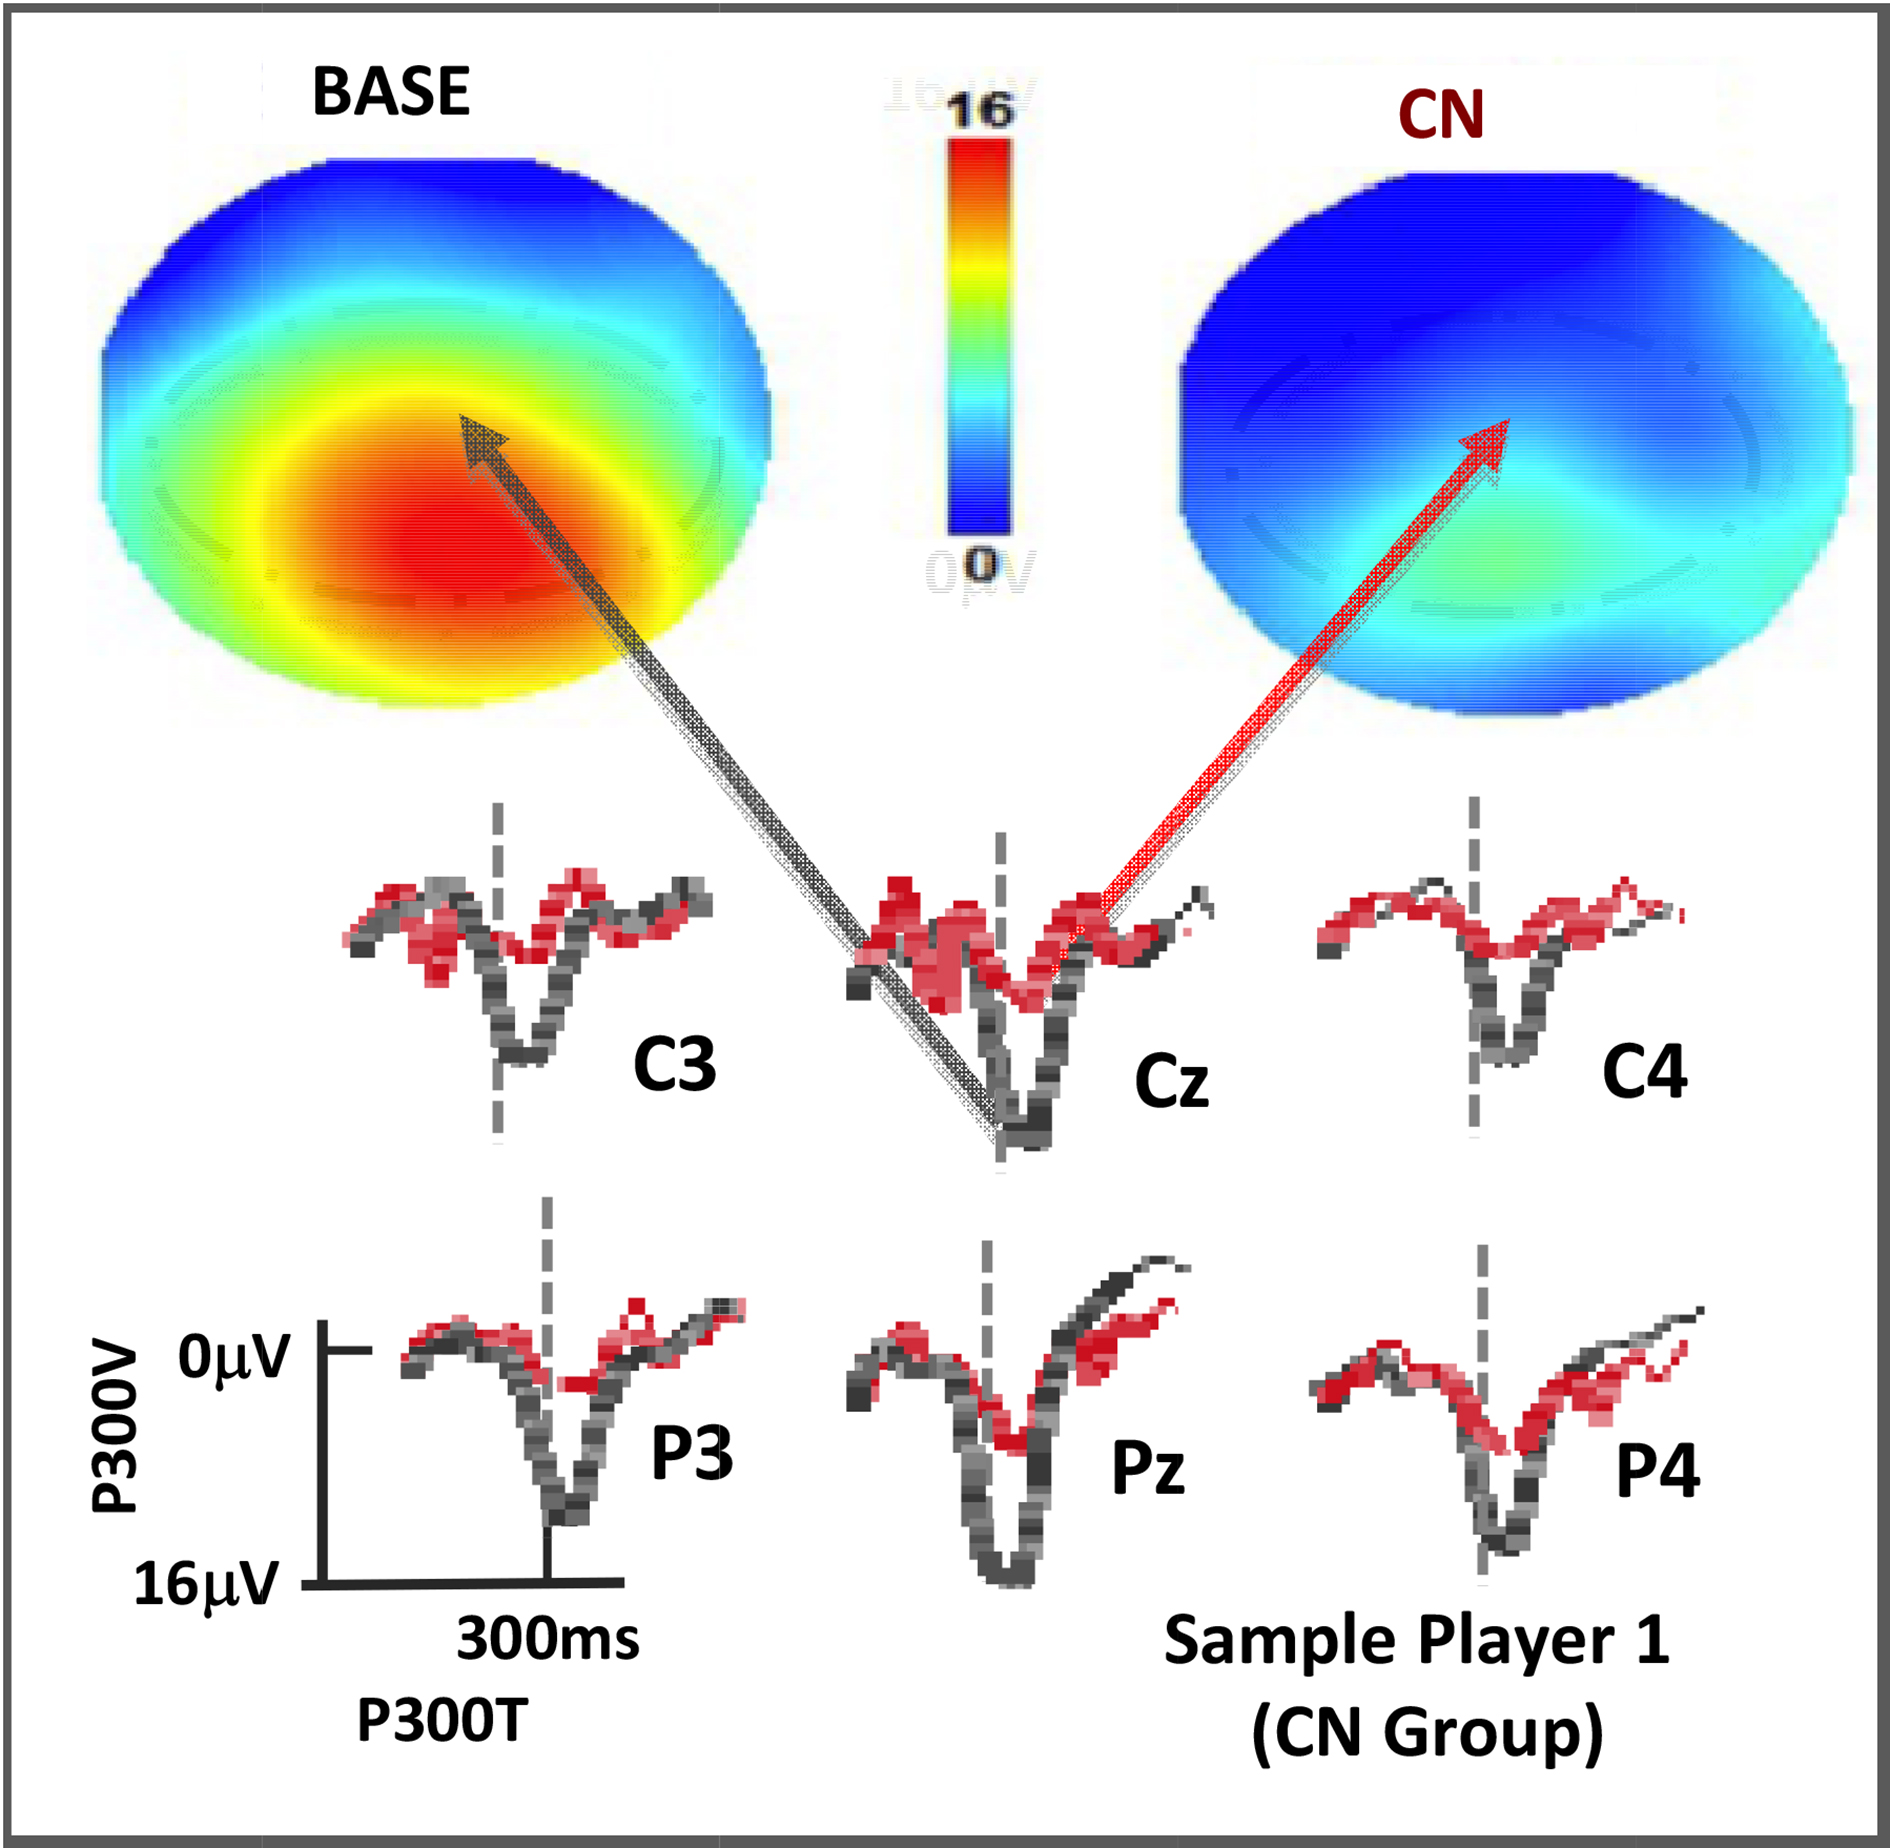 P300 rare tone depths for a player at BASE and CN displayed as topographs (top, with color scale as shown) and as voltage plots for the C-P region of interest (below, with black at BASE and red at CN). Vertical dotted lines are at 300msec post stimulus.